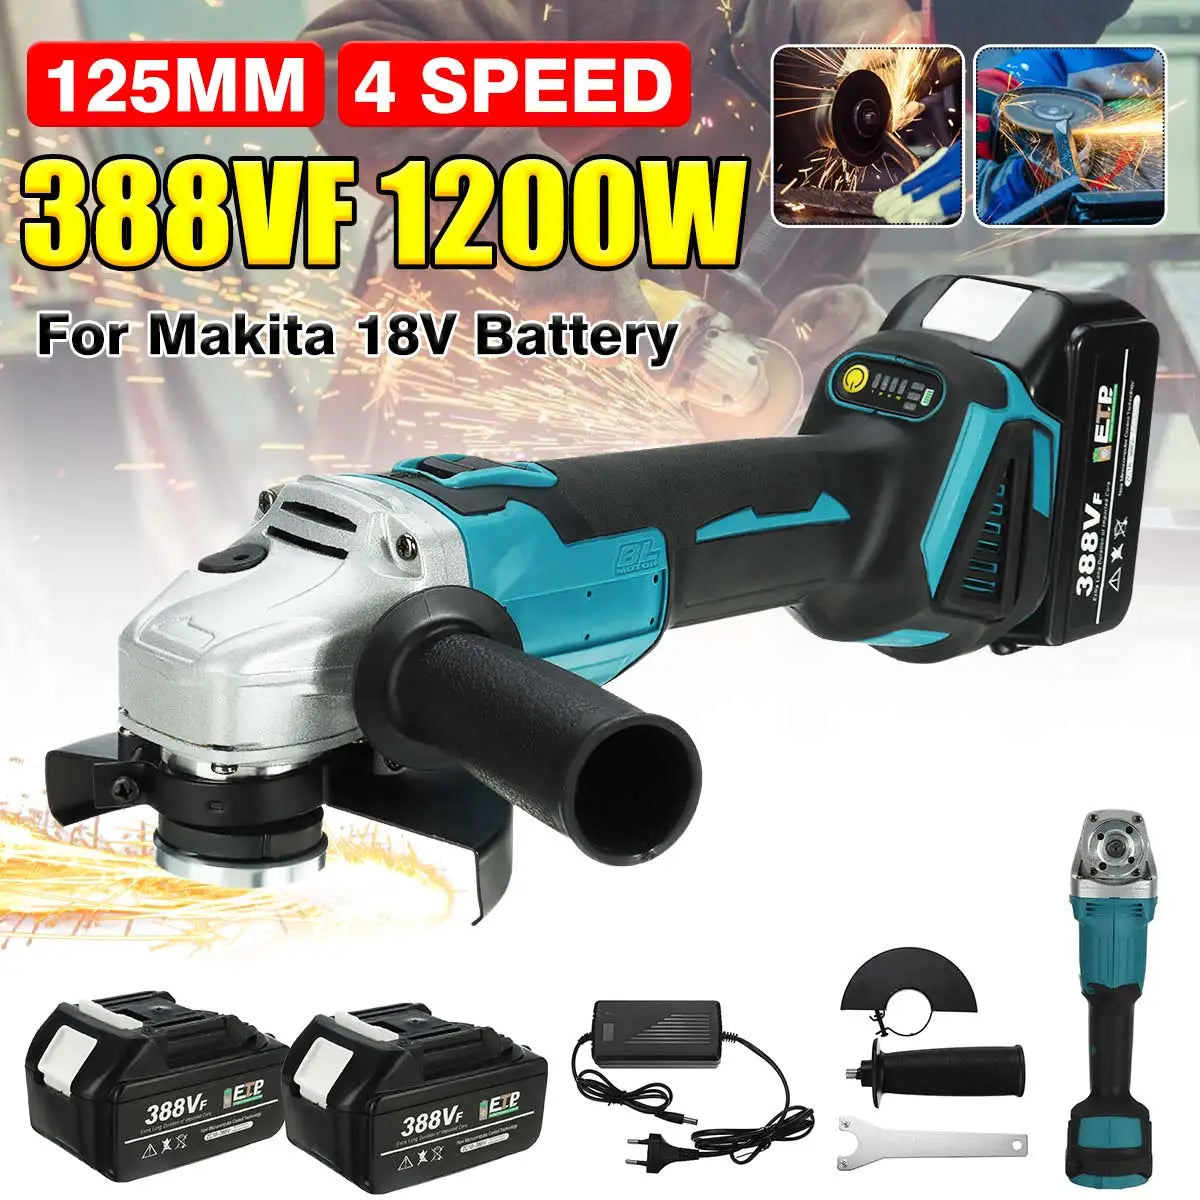 125mm M14 Brushless Electric Angle Grinder Grinding Machine Cordless Woodworking Polisher Power Tool For Makita 18V Battery  ourlum.com   